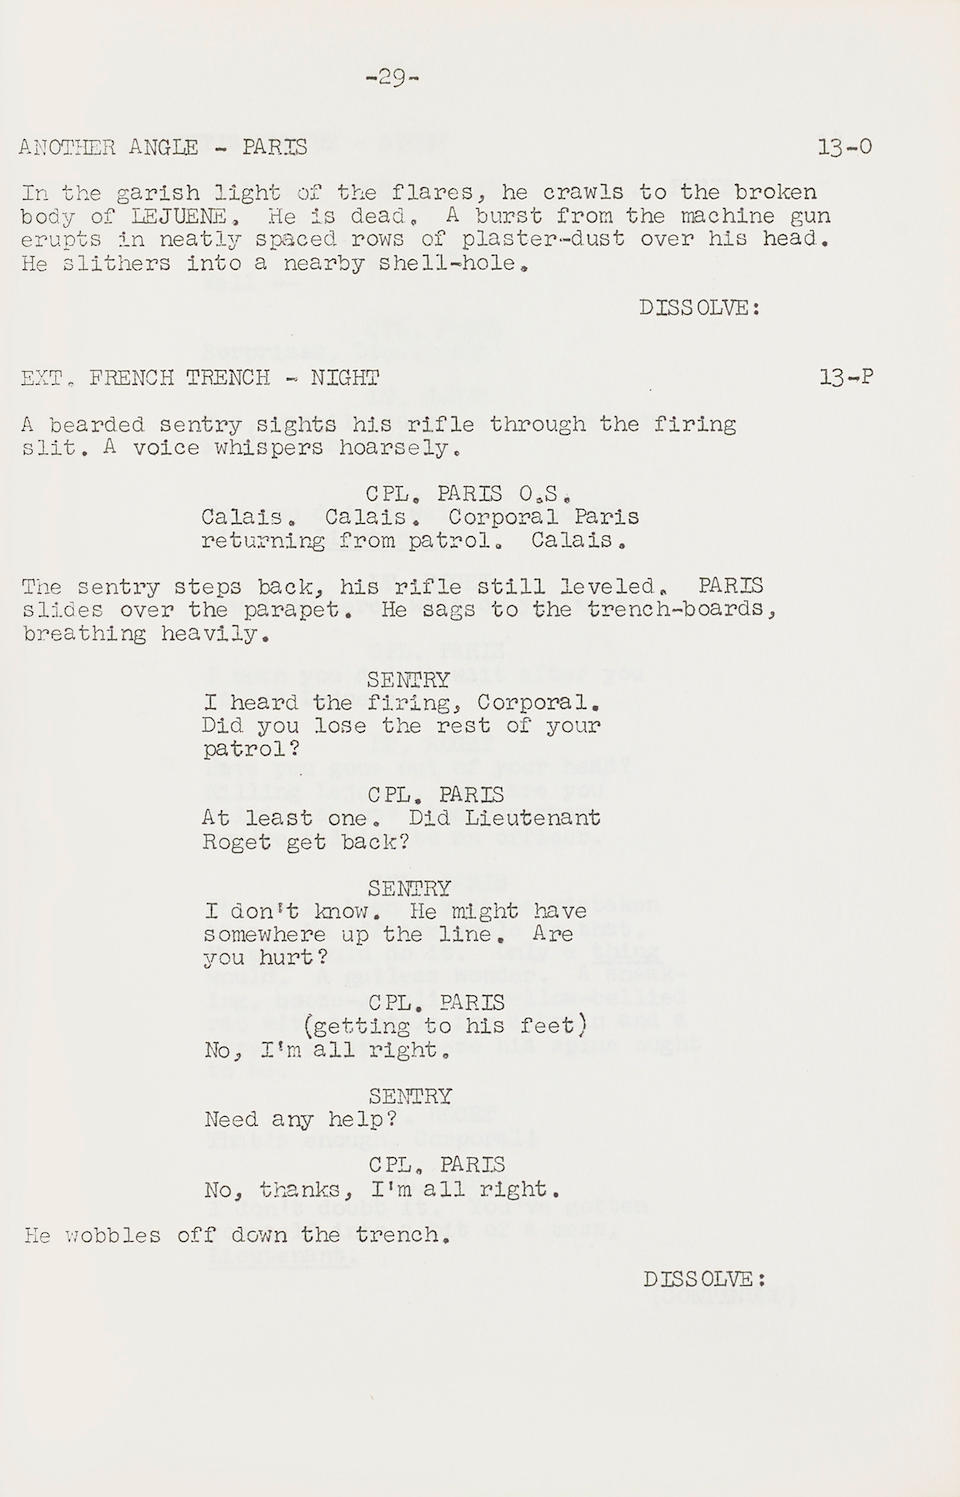 A screenplay of Paths of Glory